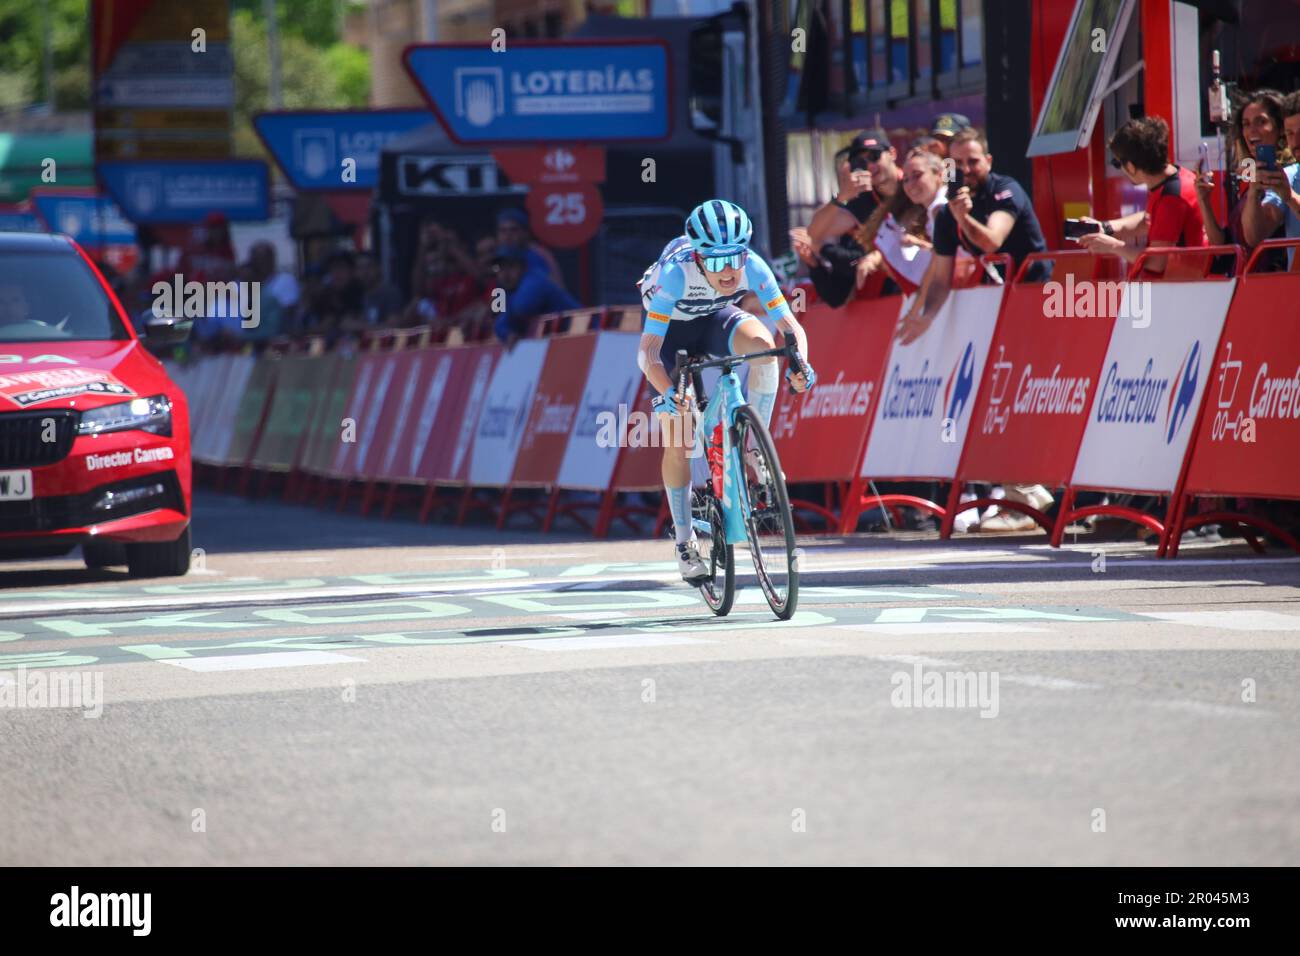 Laredo, Spain, May 06th, 2023: Trek - Segafredo cyclist Gaia Realini wins during the 6th stage of the women's LaVuelta by Carrefour 2023 between Castro-Urdiales and Laredo, on May 06, 2023, in Laredo, Spain Spain. Credit: Alberto Brevers / Alamy Live News Stock Photo